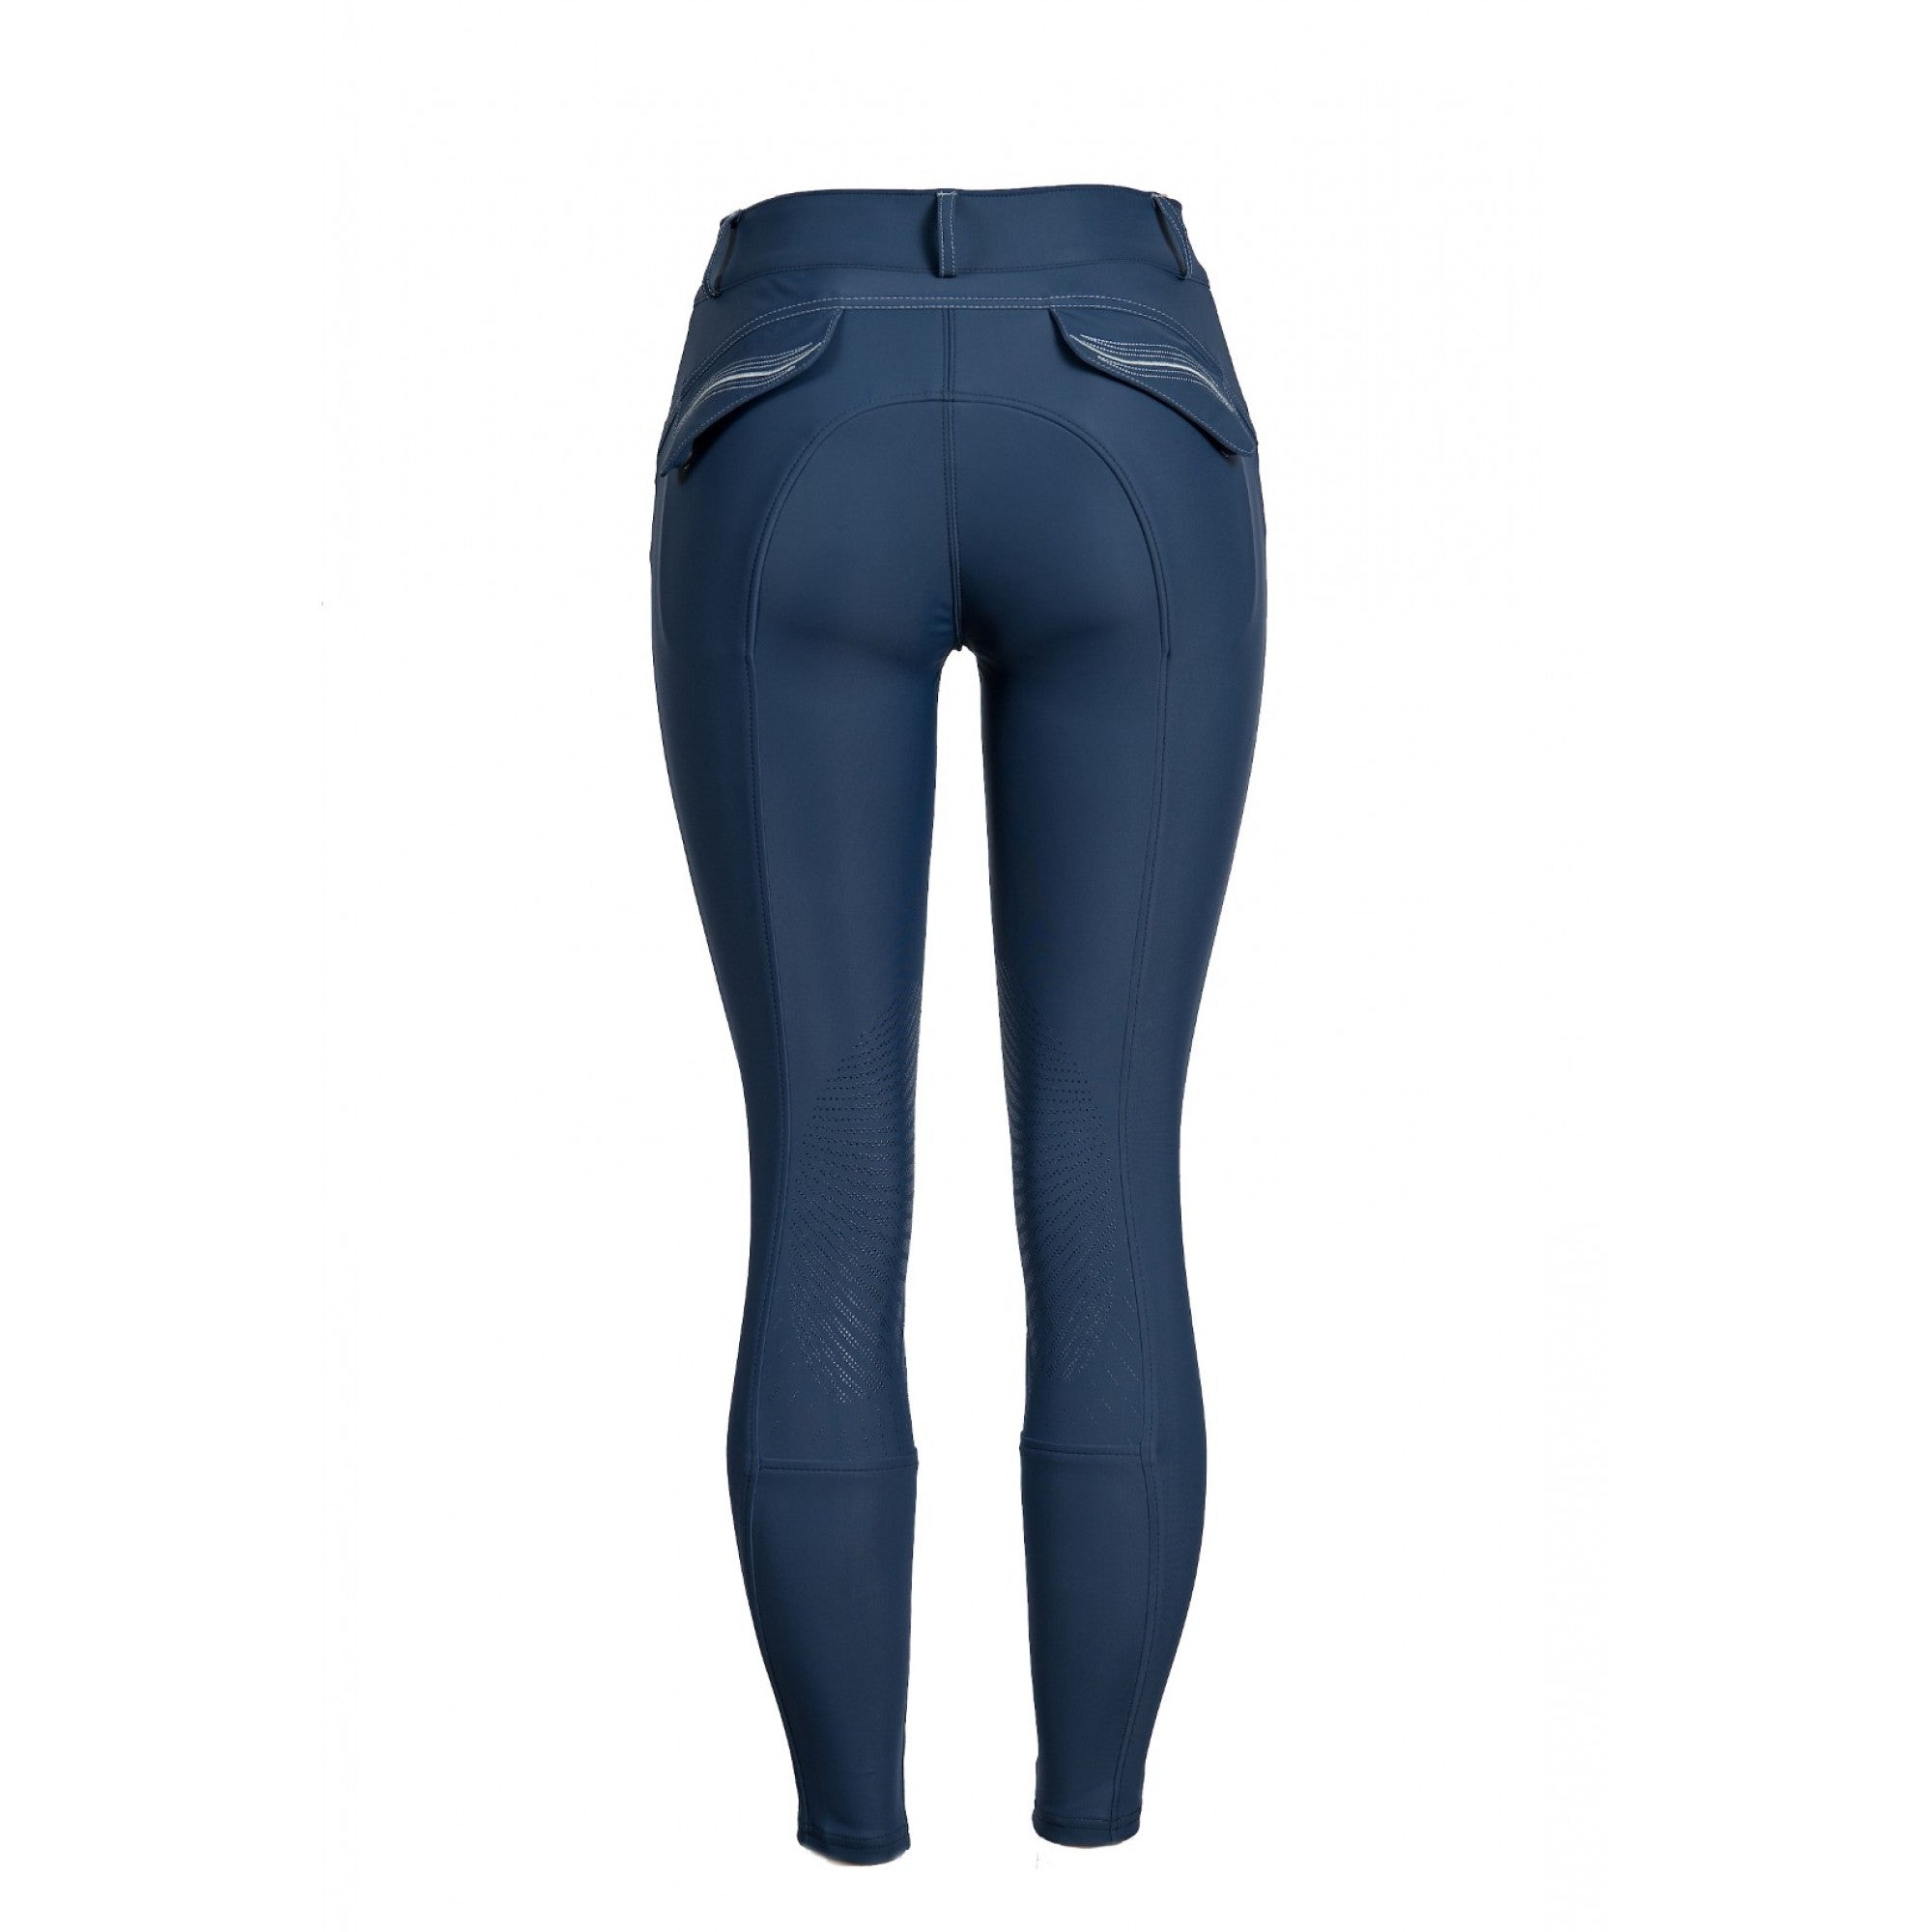 FITS Performax Zip Front Full Seat Breeches